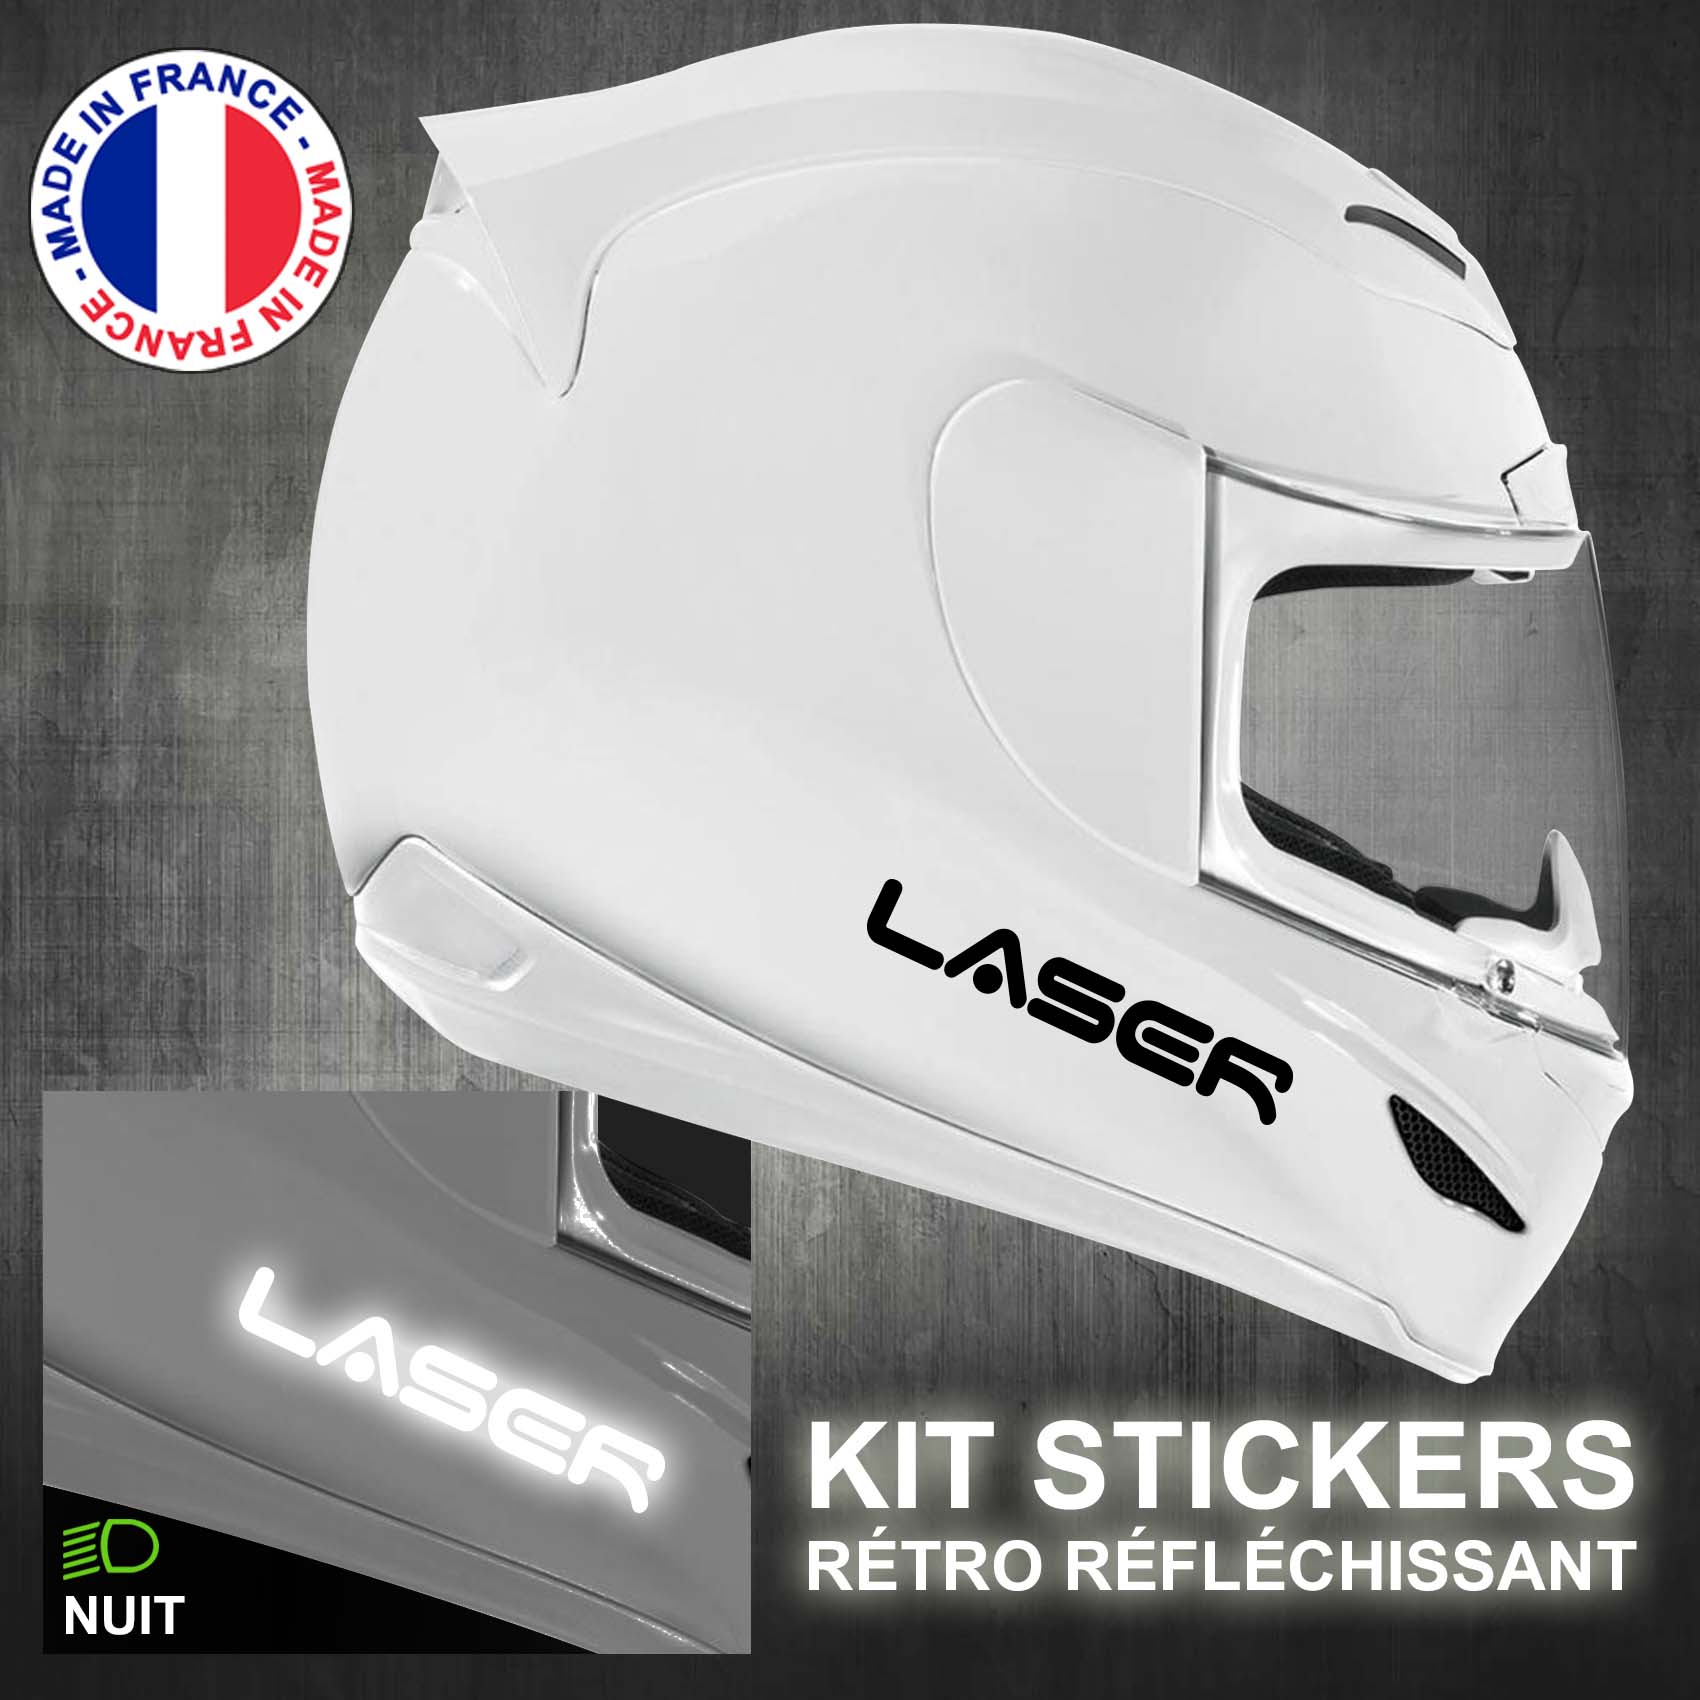 stickers-casque-moto-laser-ref1-retro-reflechissant-autocollant-moto-velo-tuning-racing-route-sticker-casques-adhesif-scooter-nuit-securite-decals-personnalise-personnalisable-min